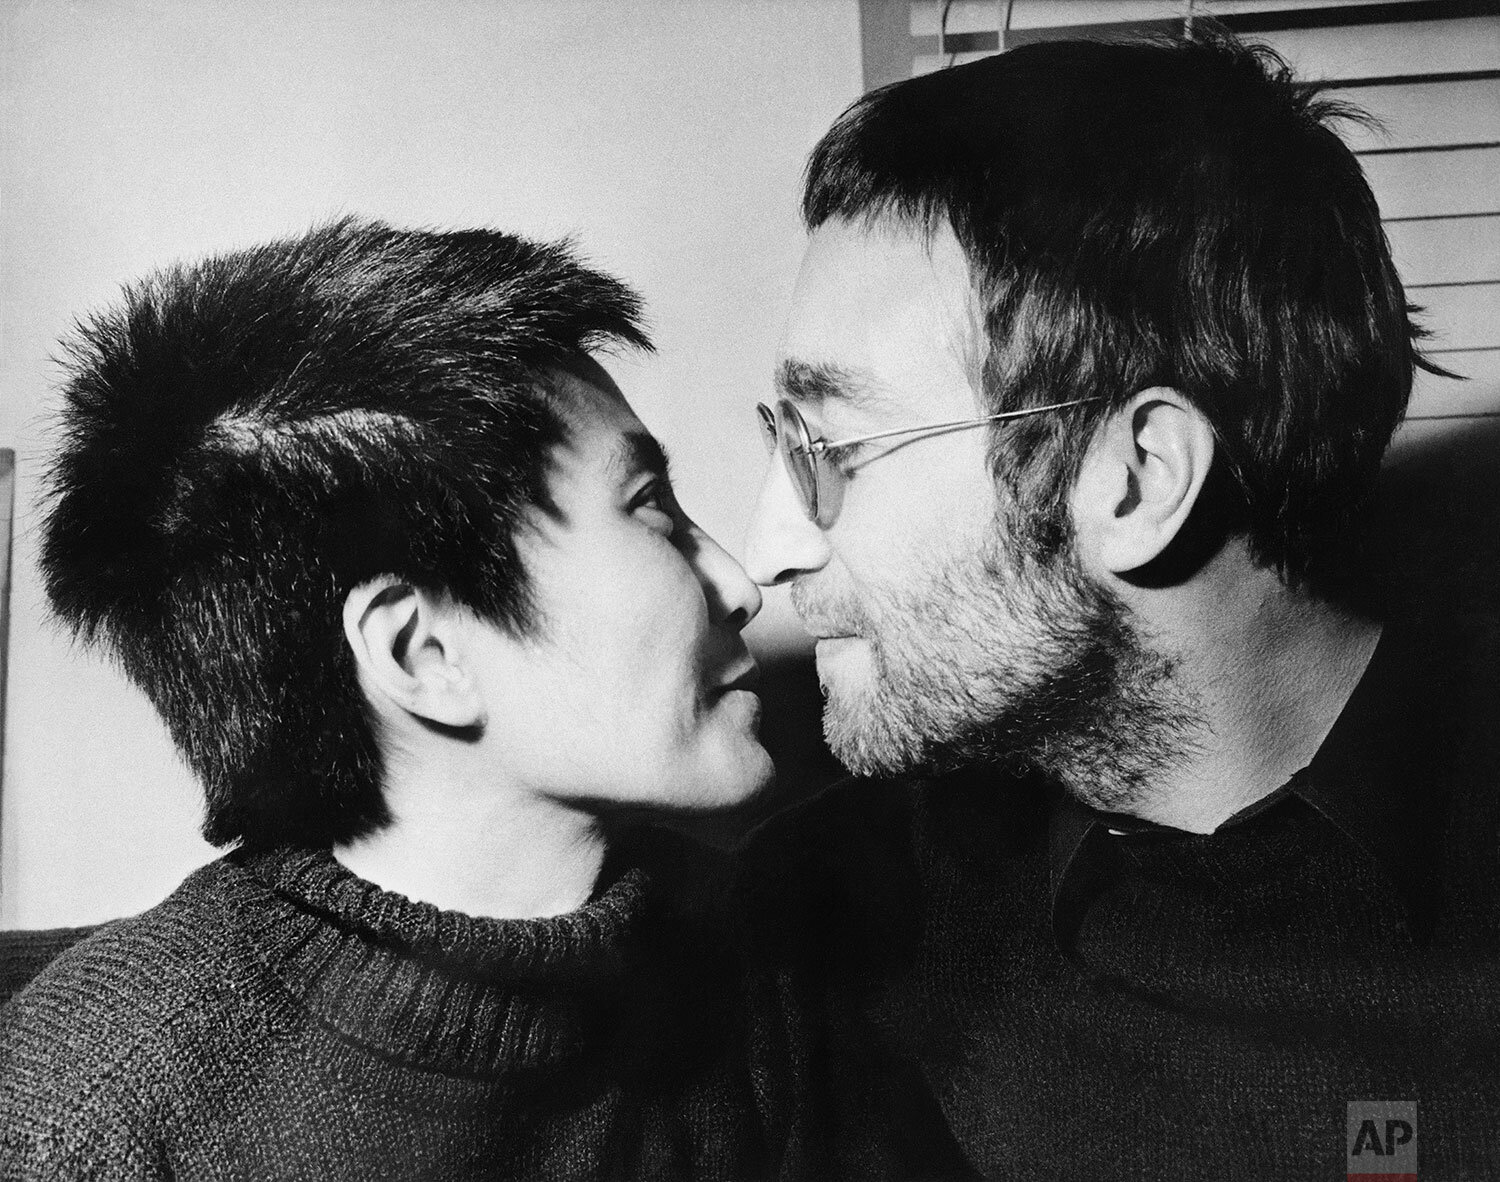  John Lennon and his wife Yoko Ono share an Eskimo kiss (rubbing noses) during an interview in London, Feb. 9, 1970.  Both had their hair shorn in Denmark to be auctioned off in London. The proceeds will go to the Black Power organization in Britain.